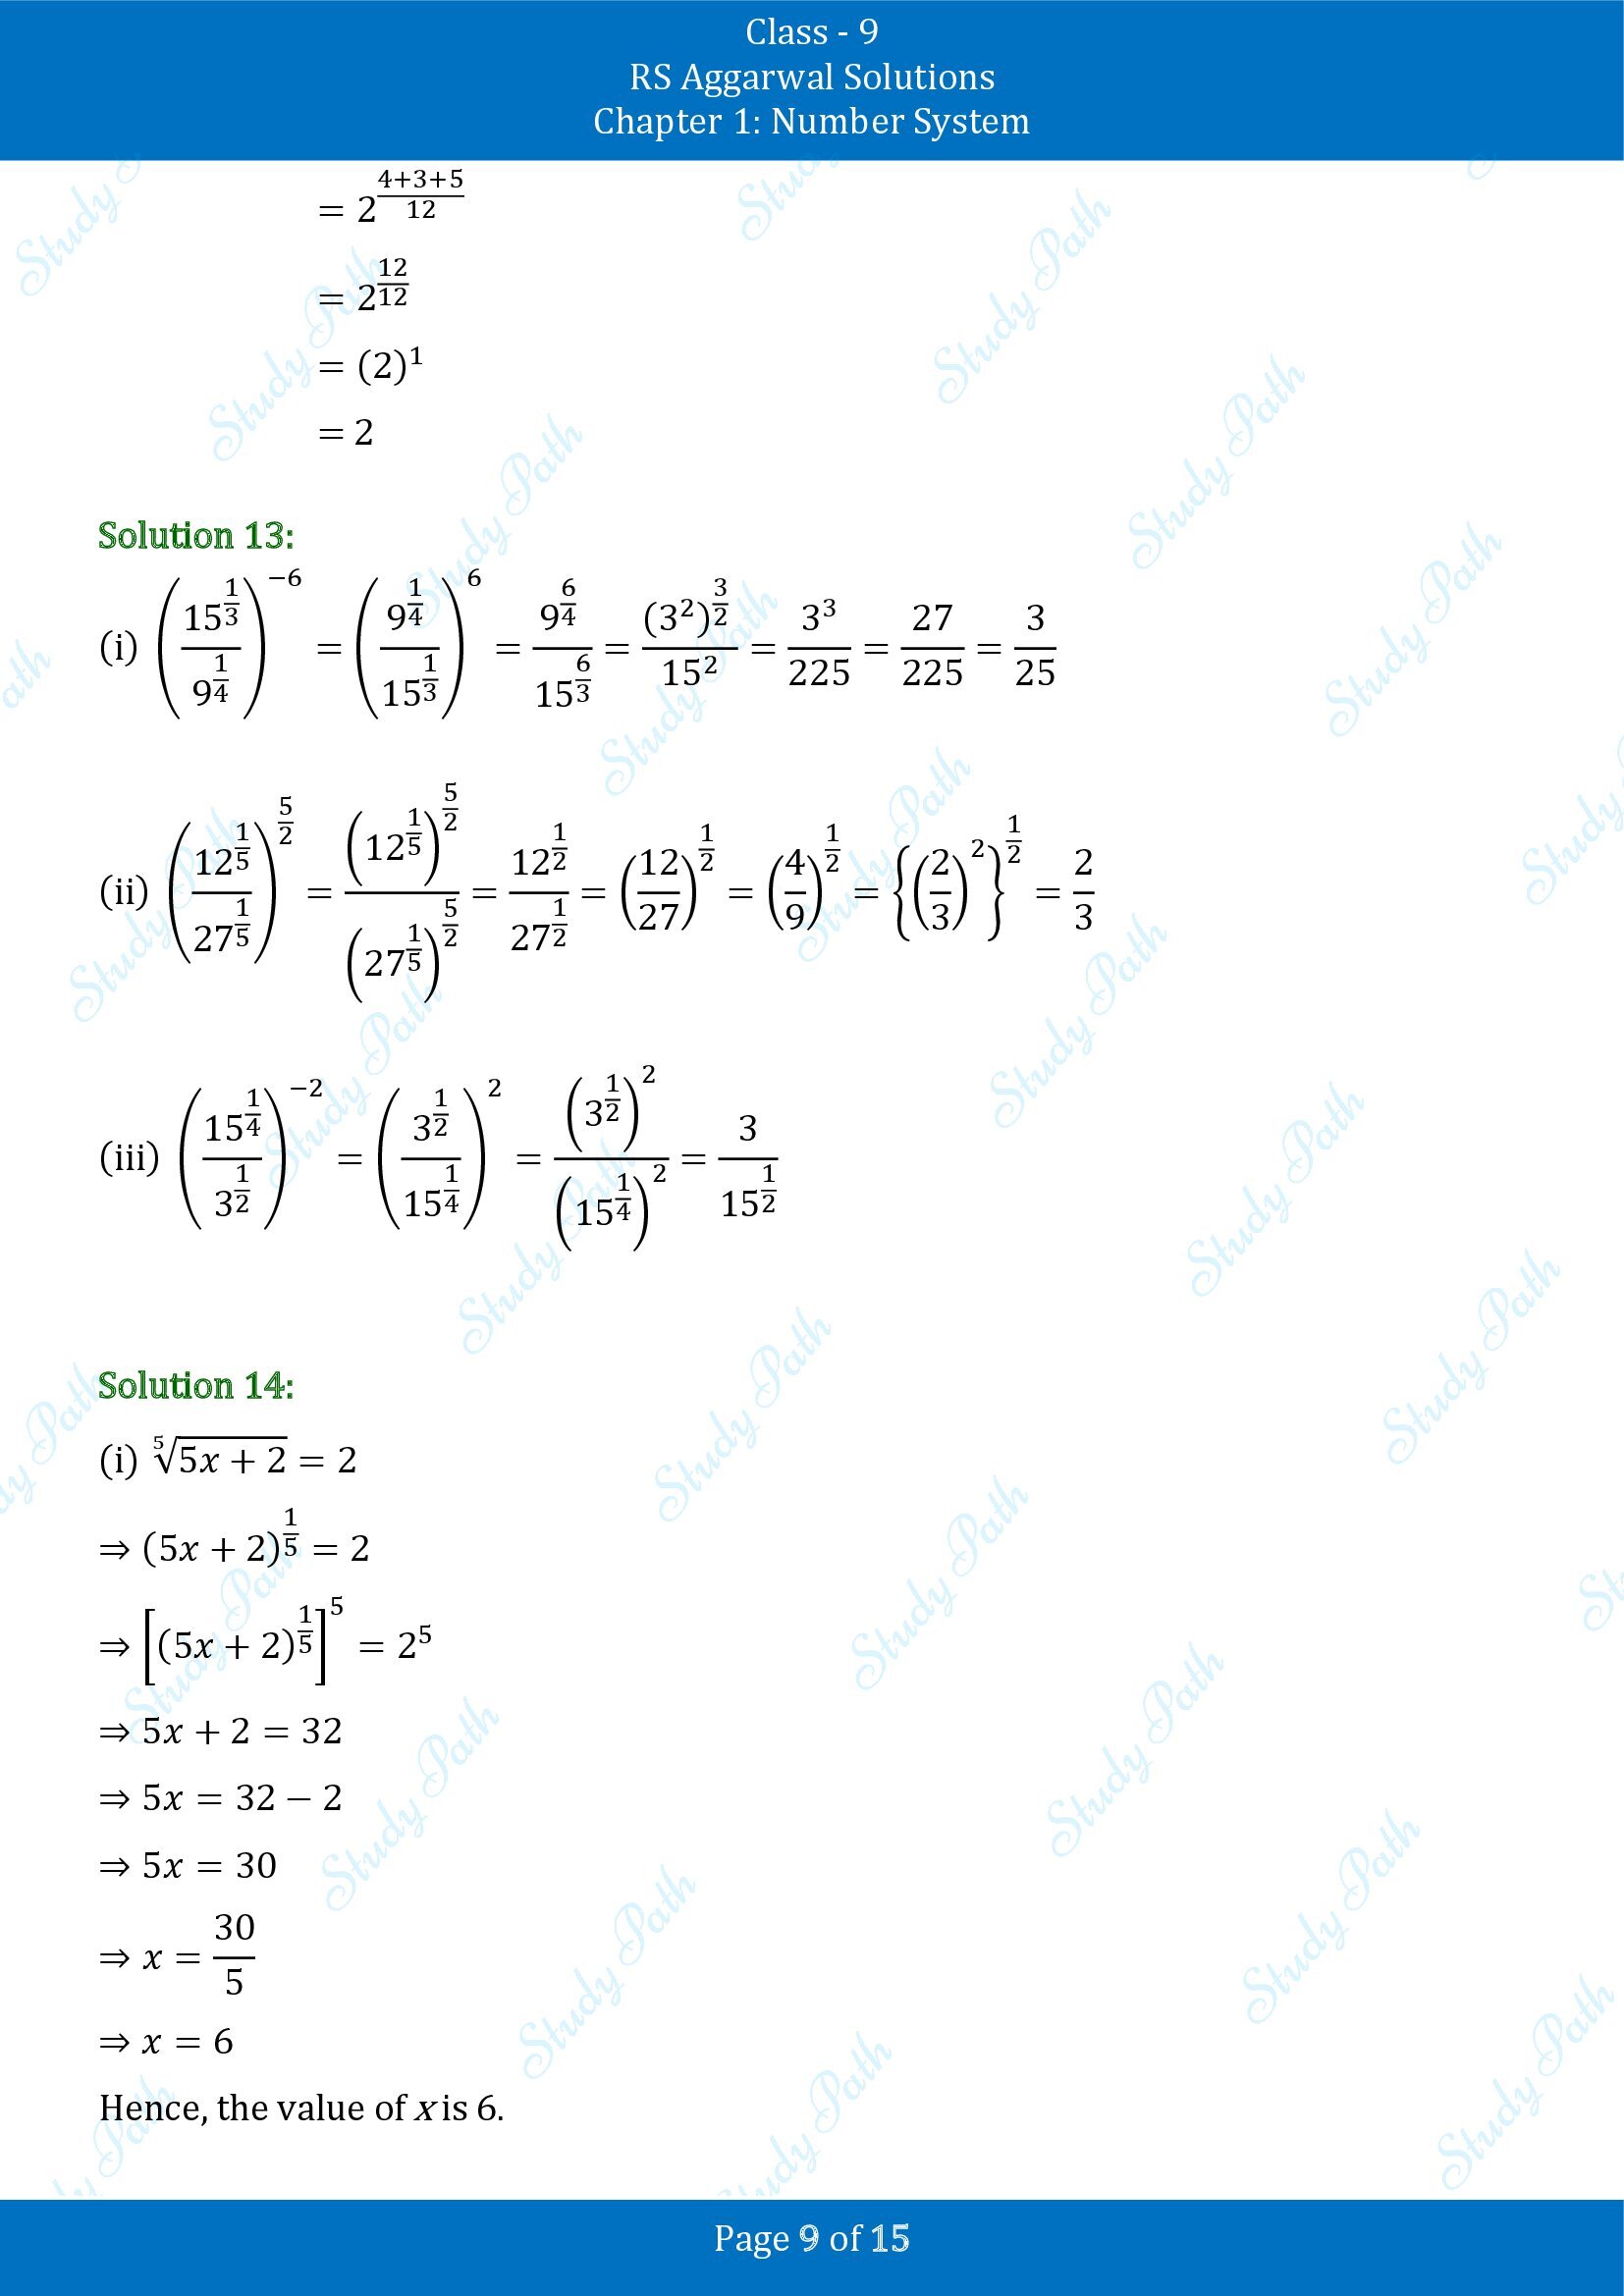 RS Aggarwal Solutions Class 9 Chapter 1 Number System Exercise 1G 00009